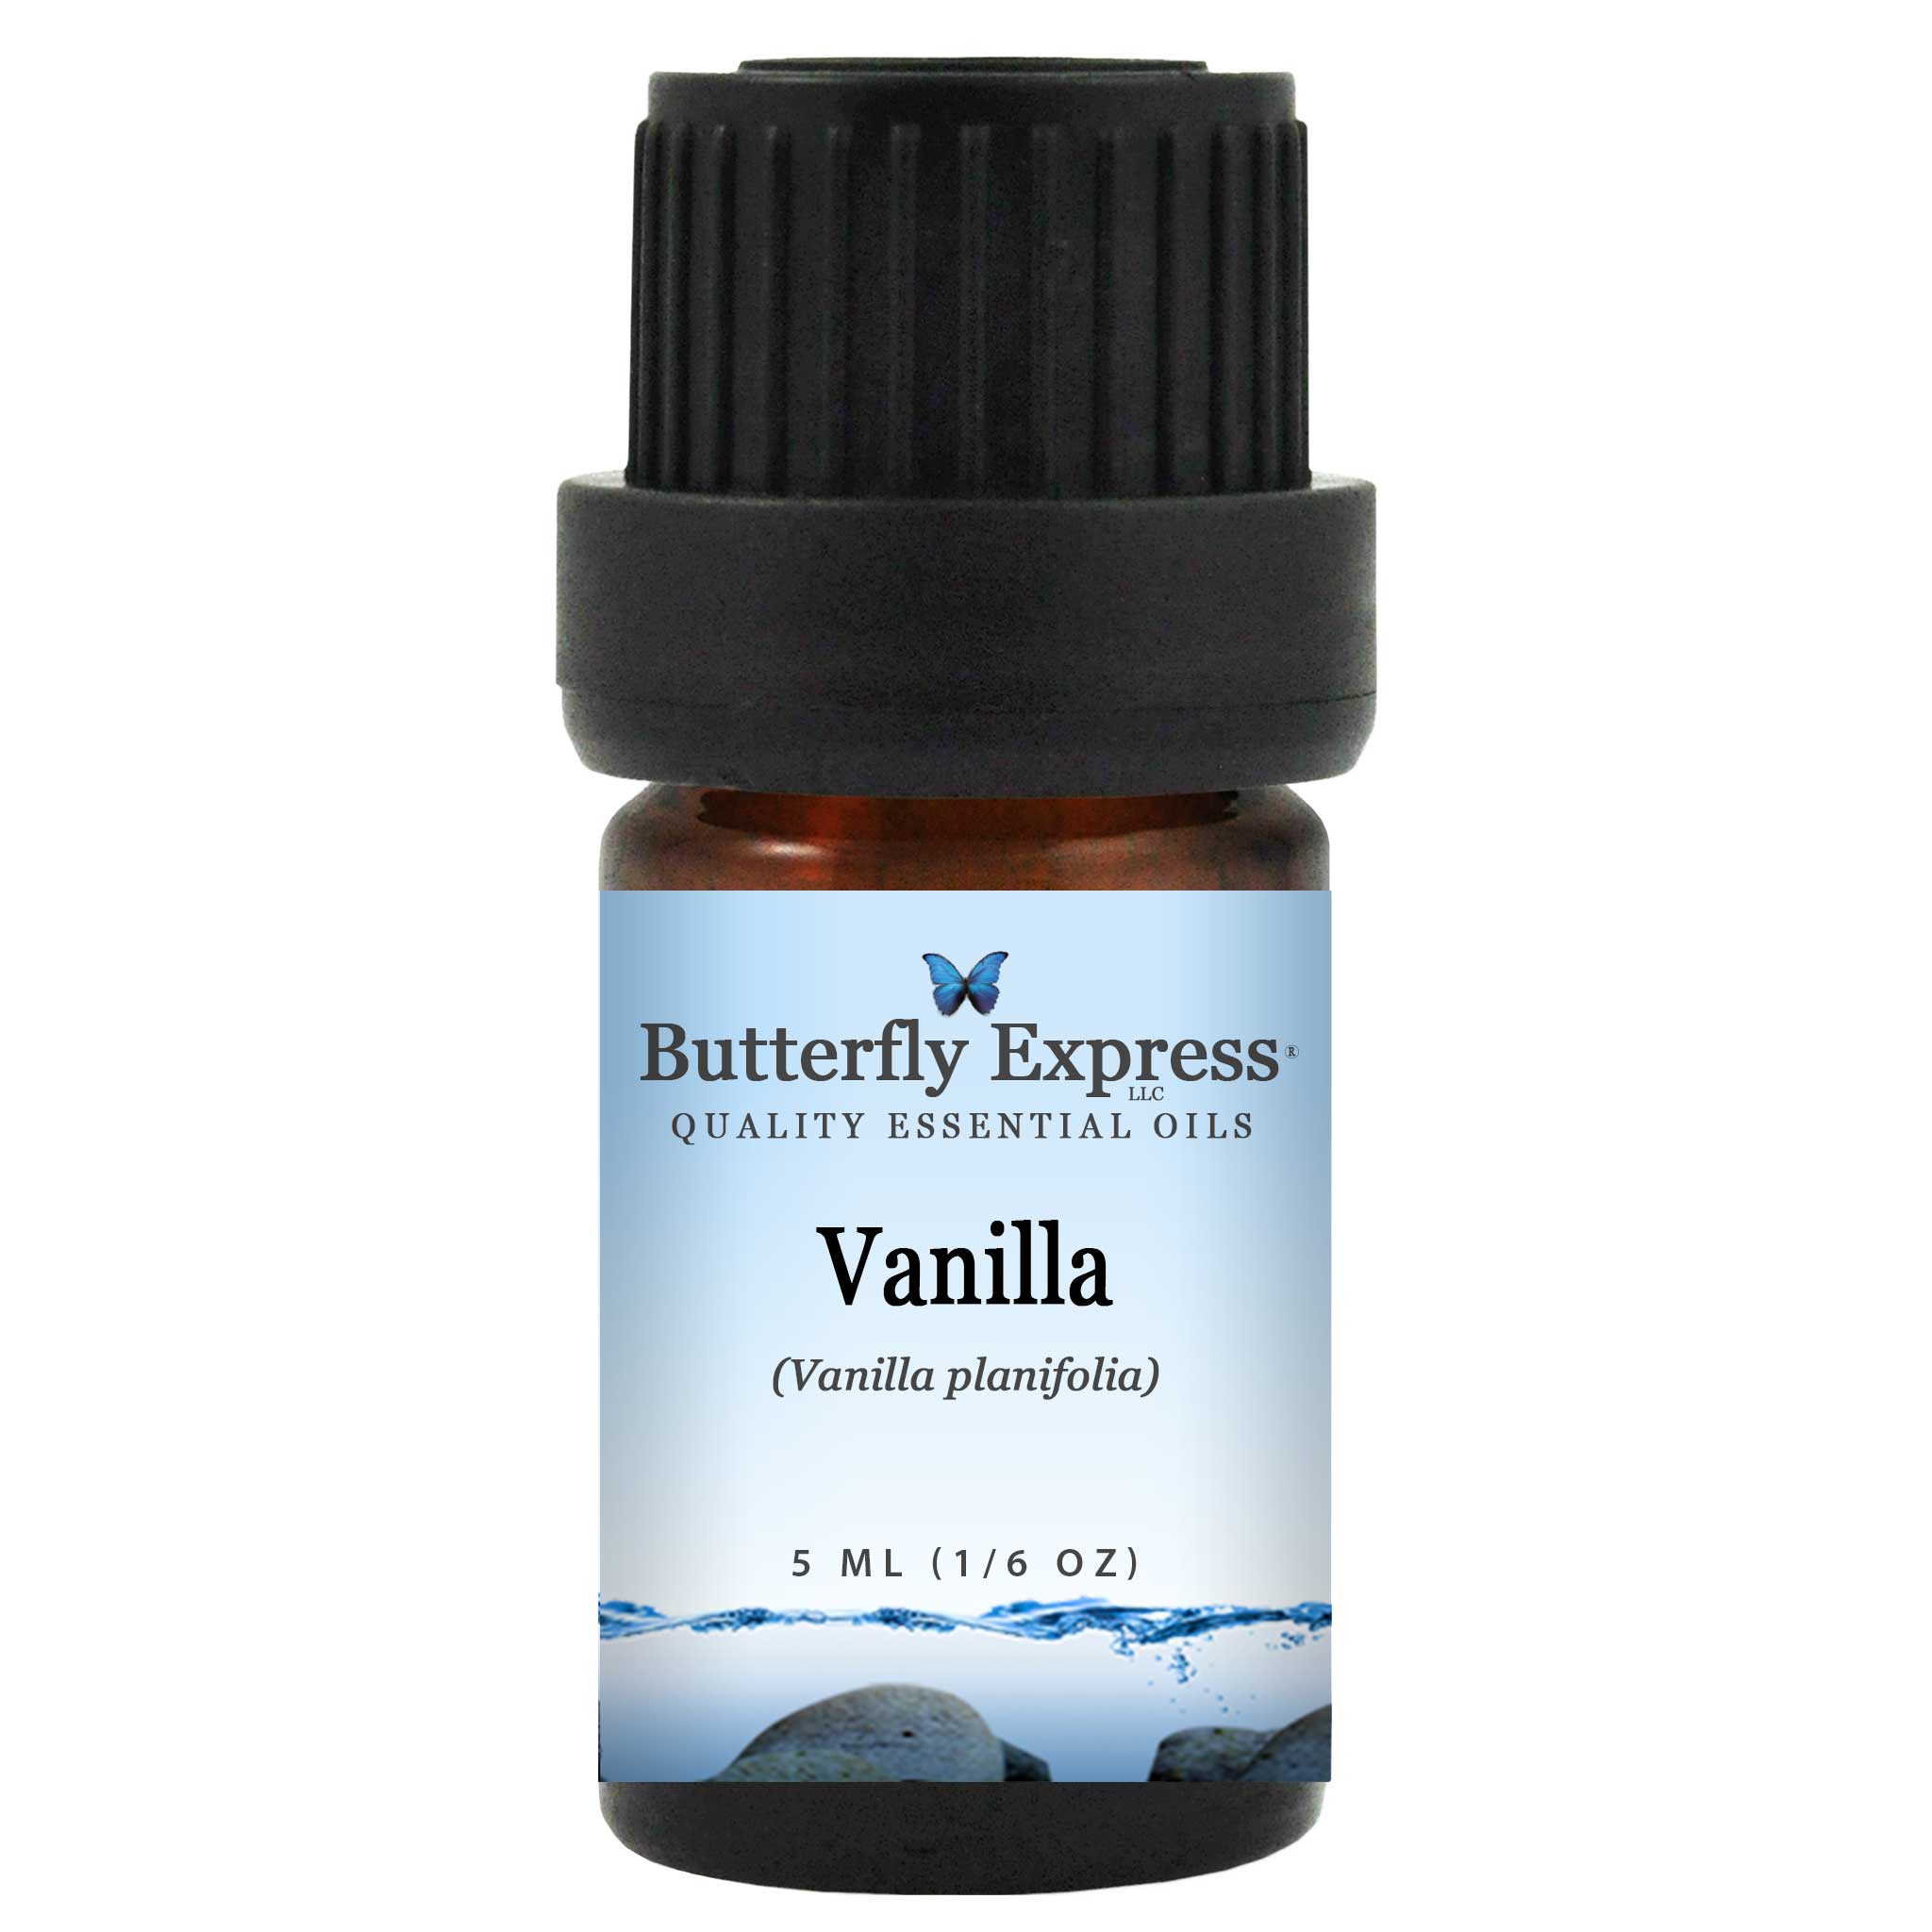 All About Vanilla Oleoresin  Vanilla oil, Young living essential